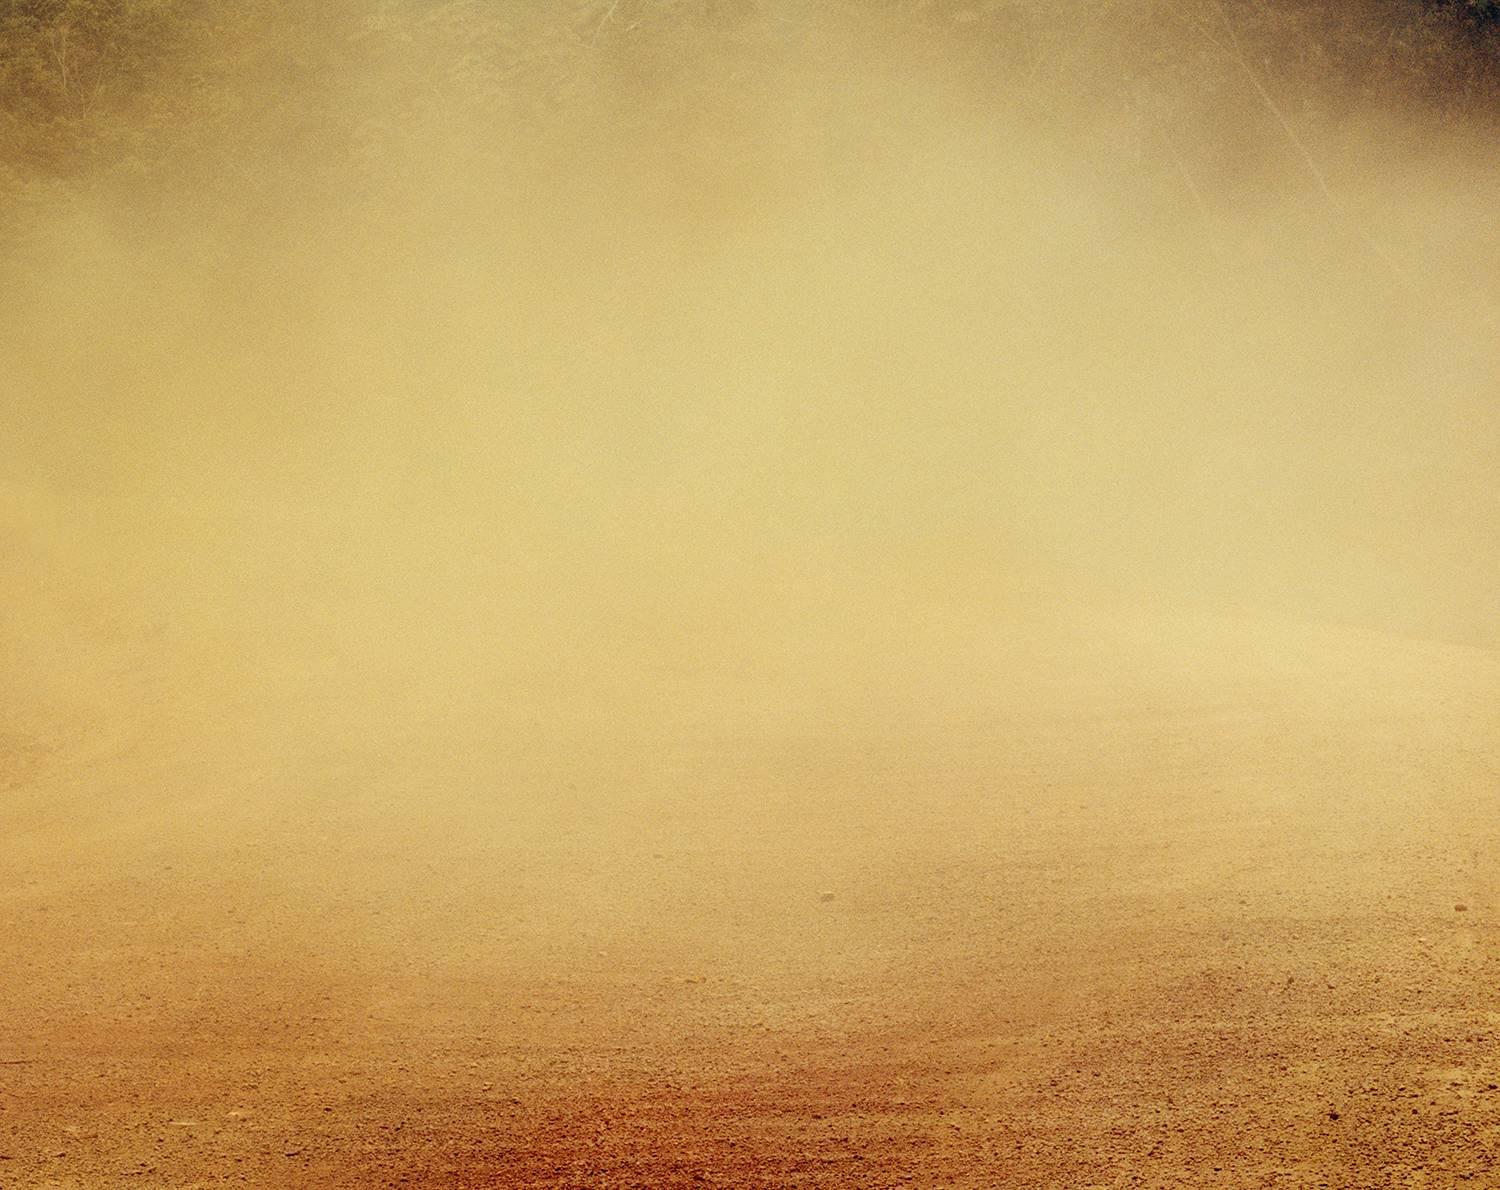 Dust #4545, 40"x50" limited edition photograph